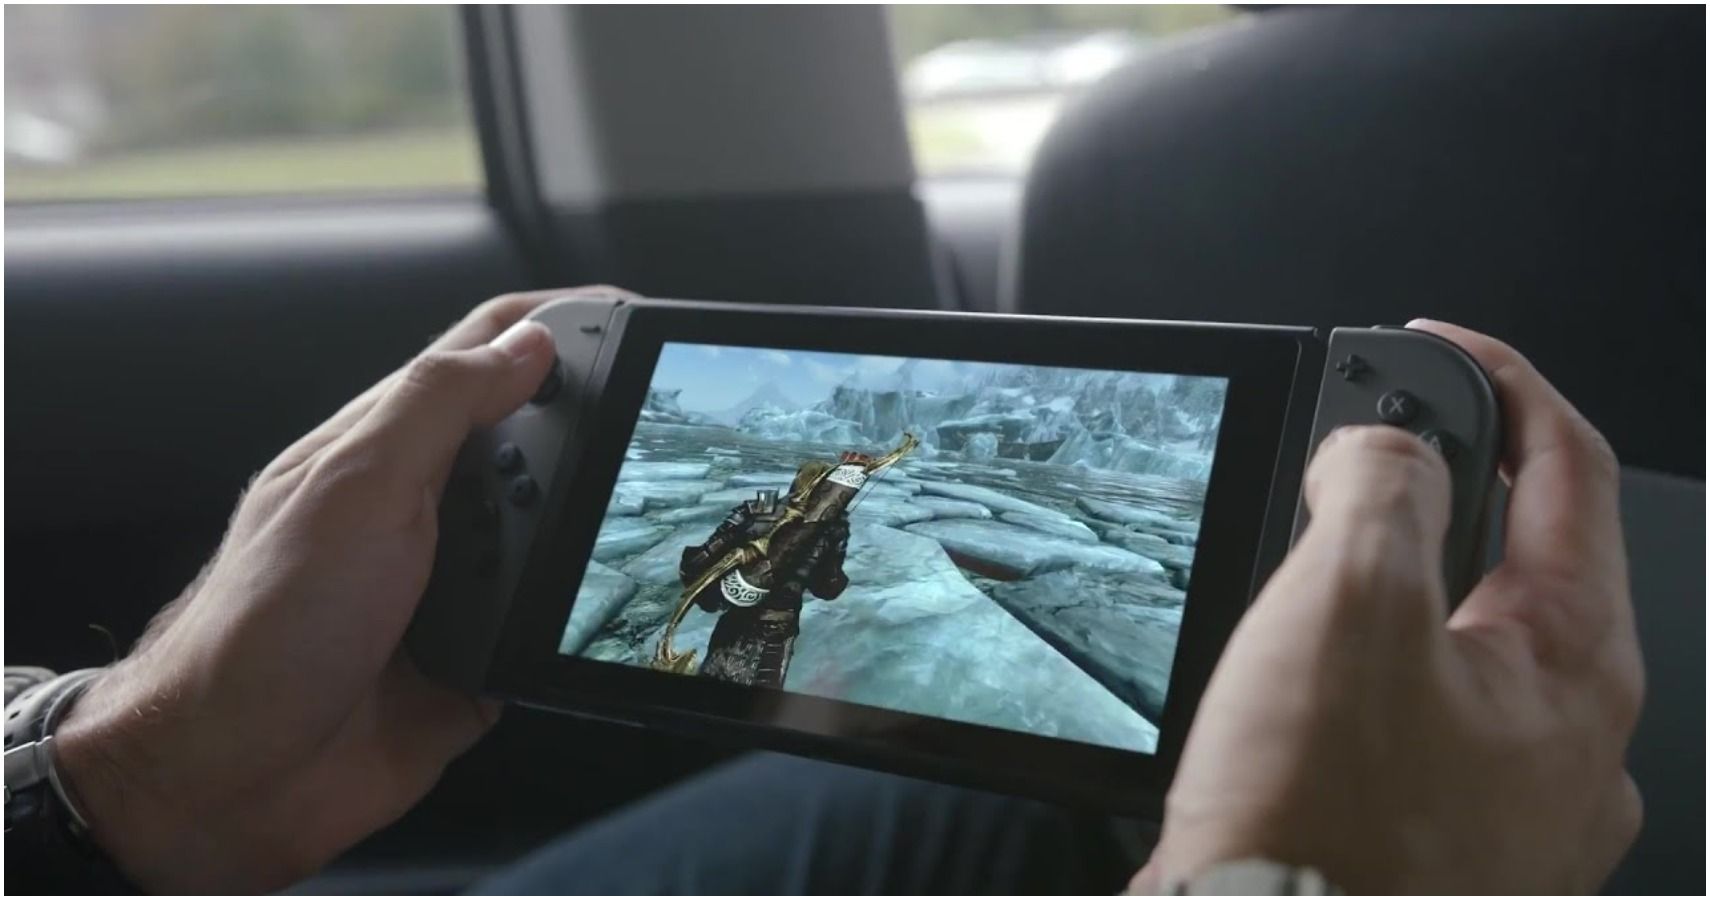 Nintendo Has No Plans To Reveal New Switch At E3 2019